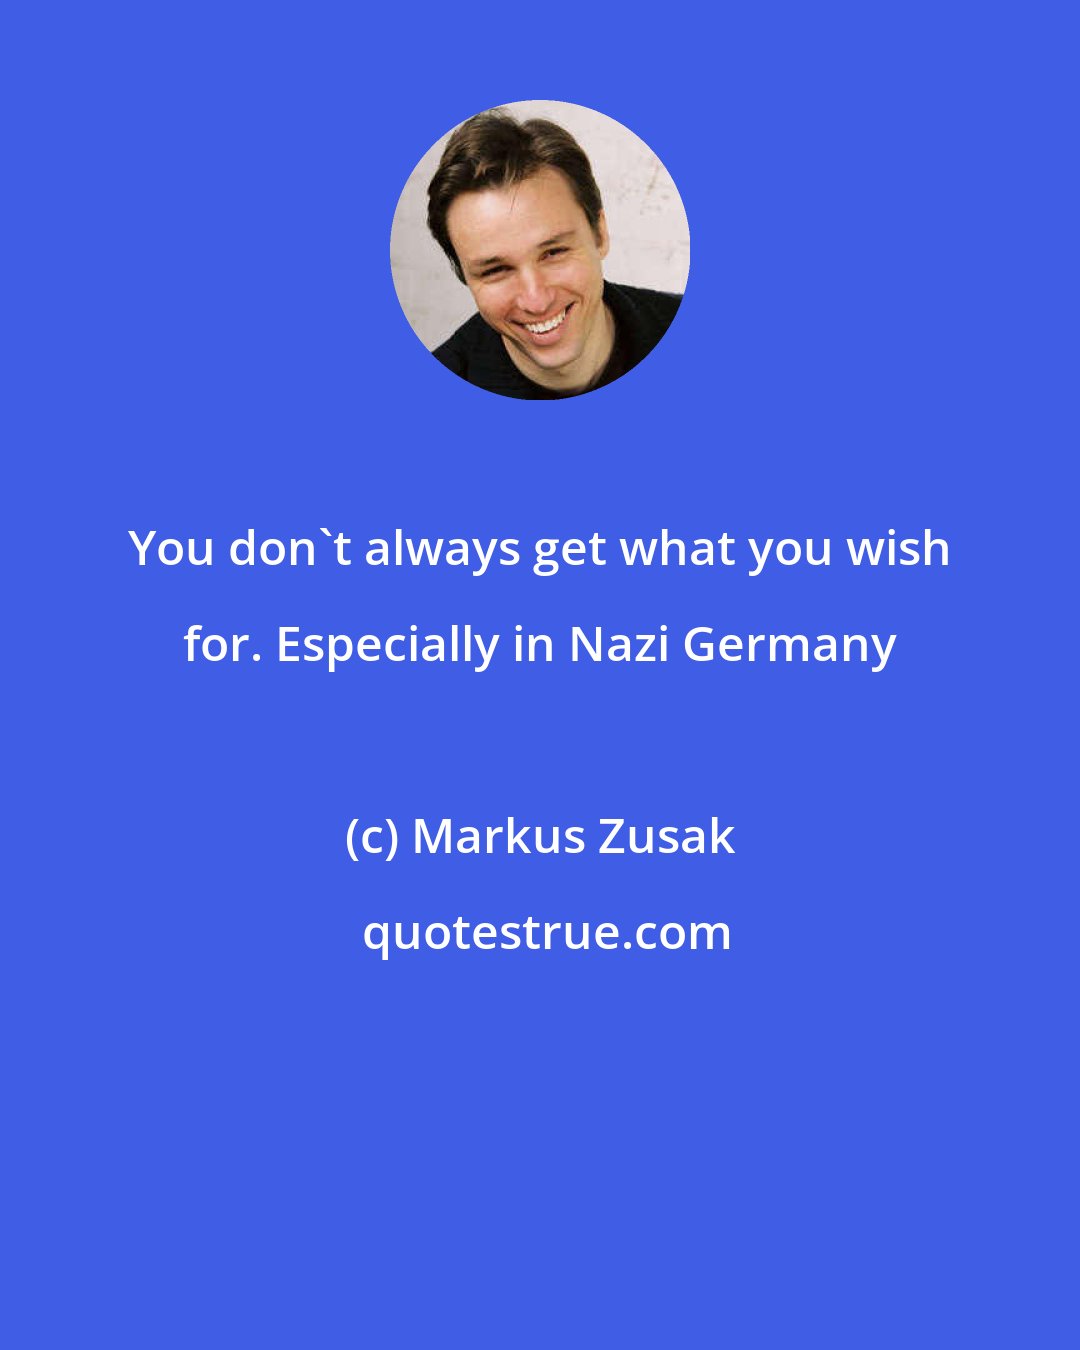 Markus Zusak: You don't always get what you wish for. Especially in Nazi Germany